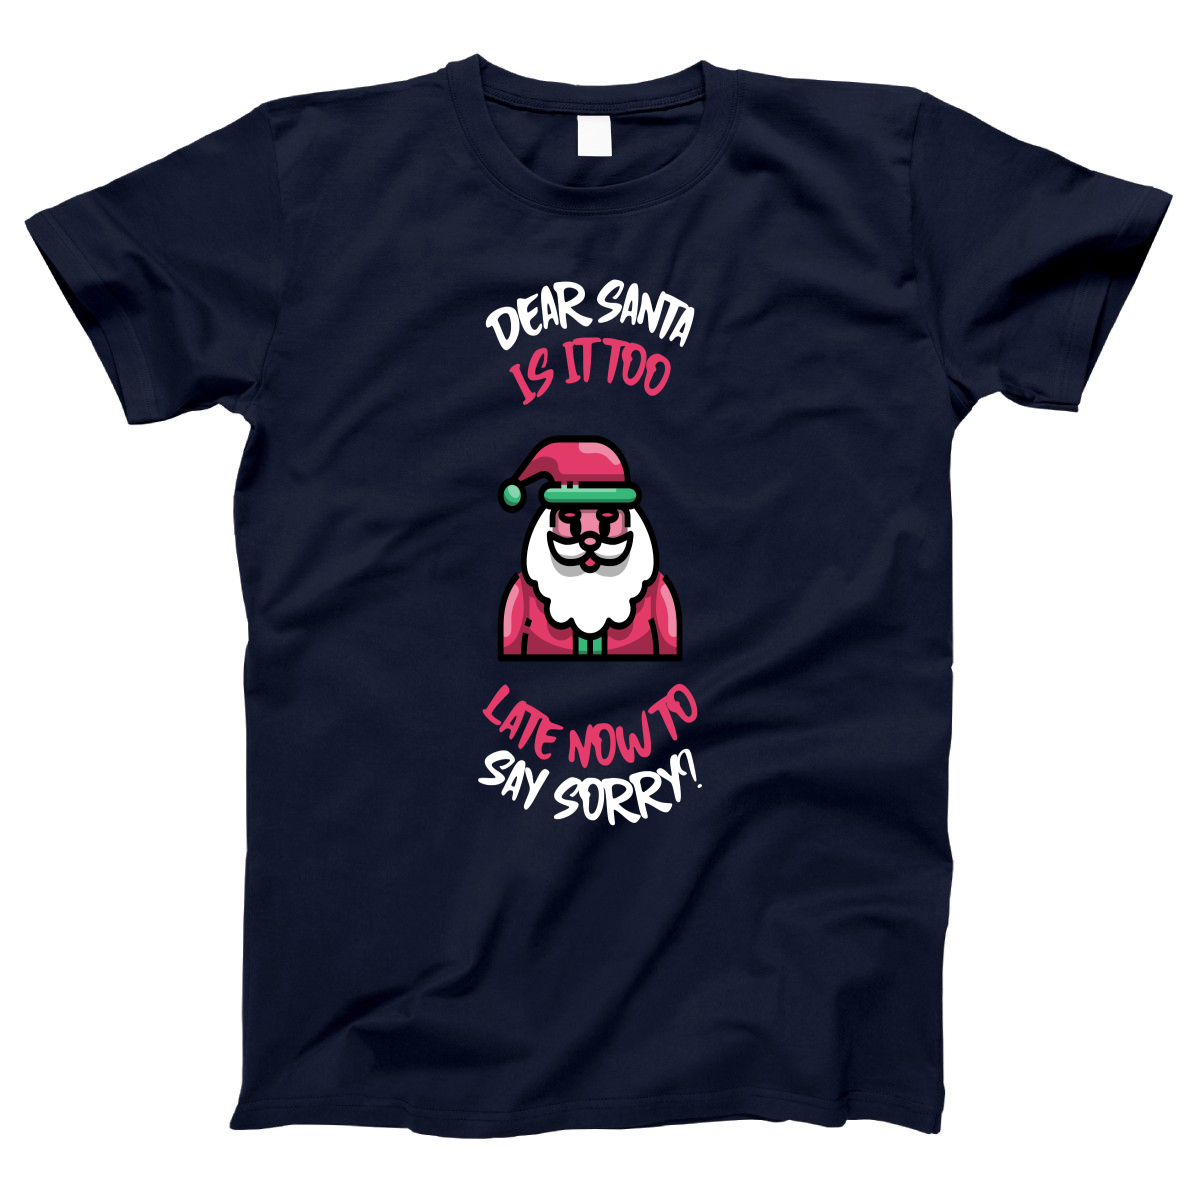 Dear Santa, Is It Too Late to Say Sorry? Women's T-shirt | Navy